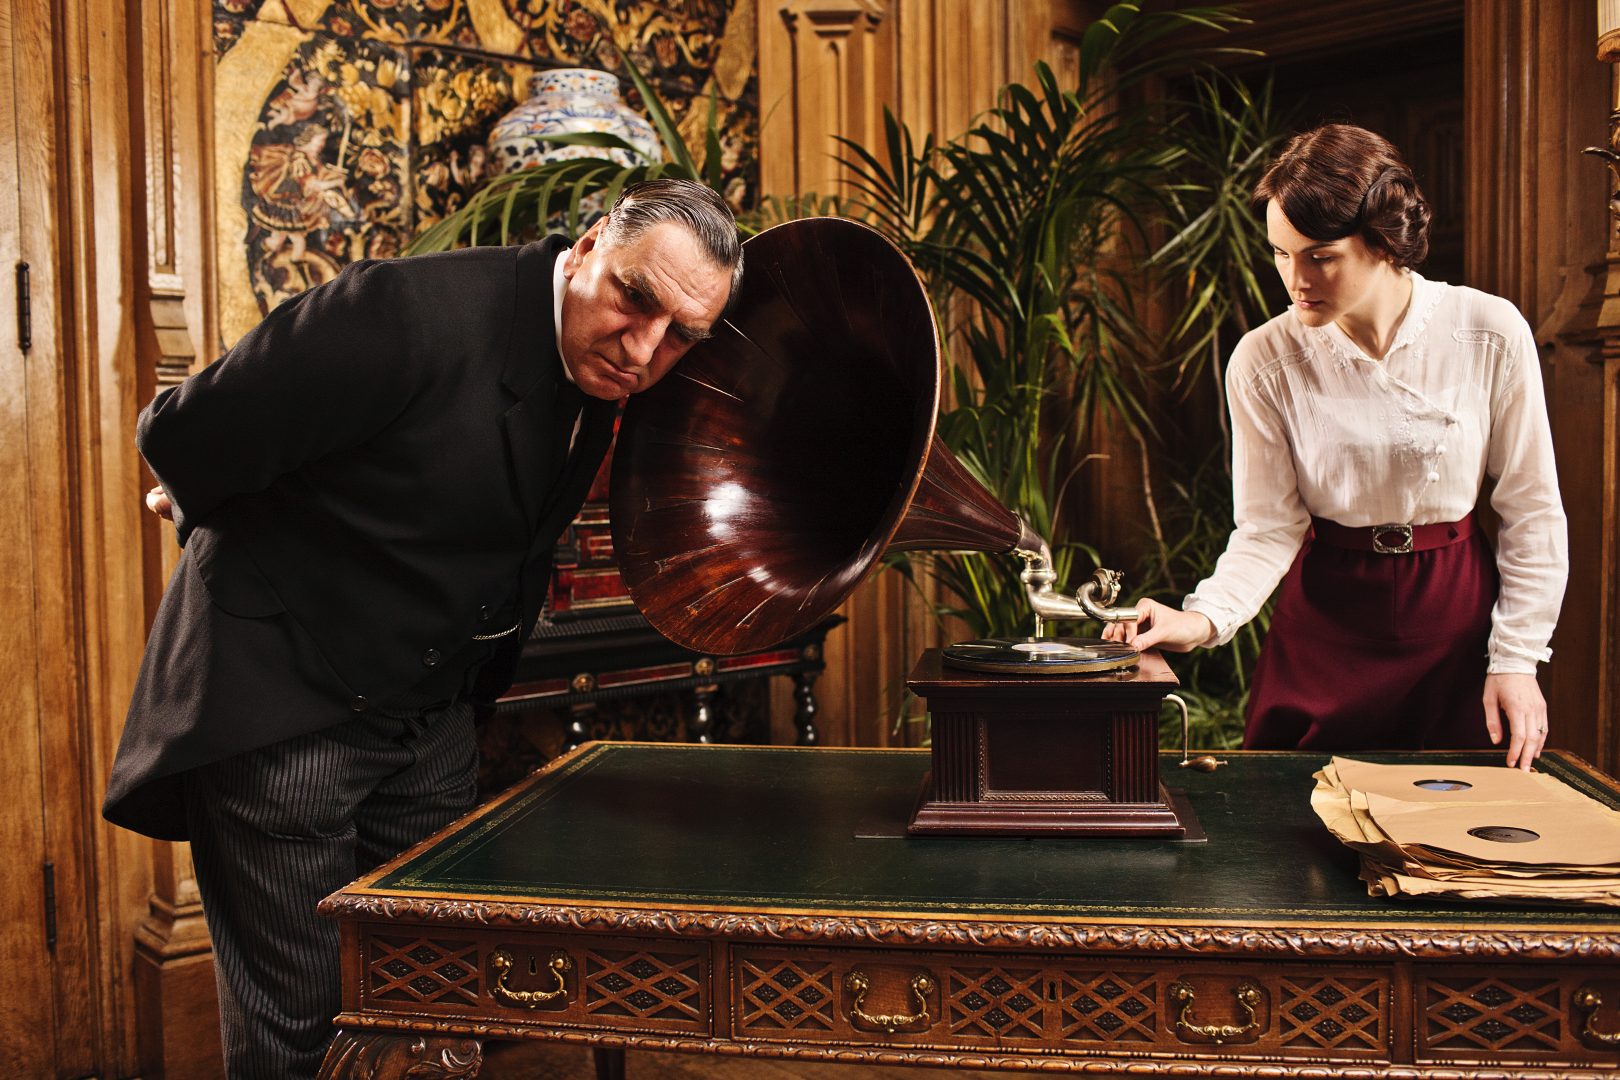 From Downton Abbey Season 2.  Shown from L-R: Jim Carter as Mr. Carson and Michelle Dockery as Lady Mary